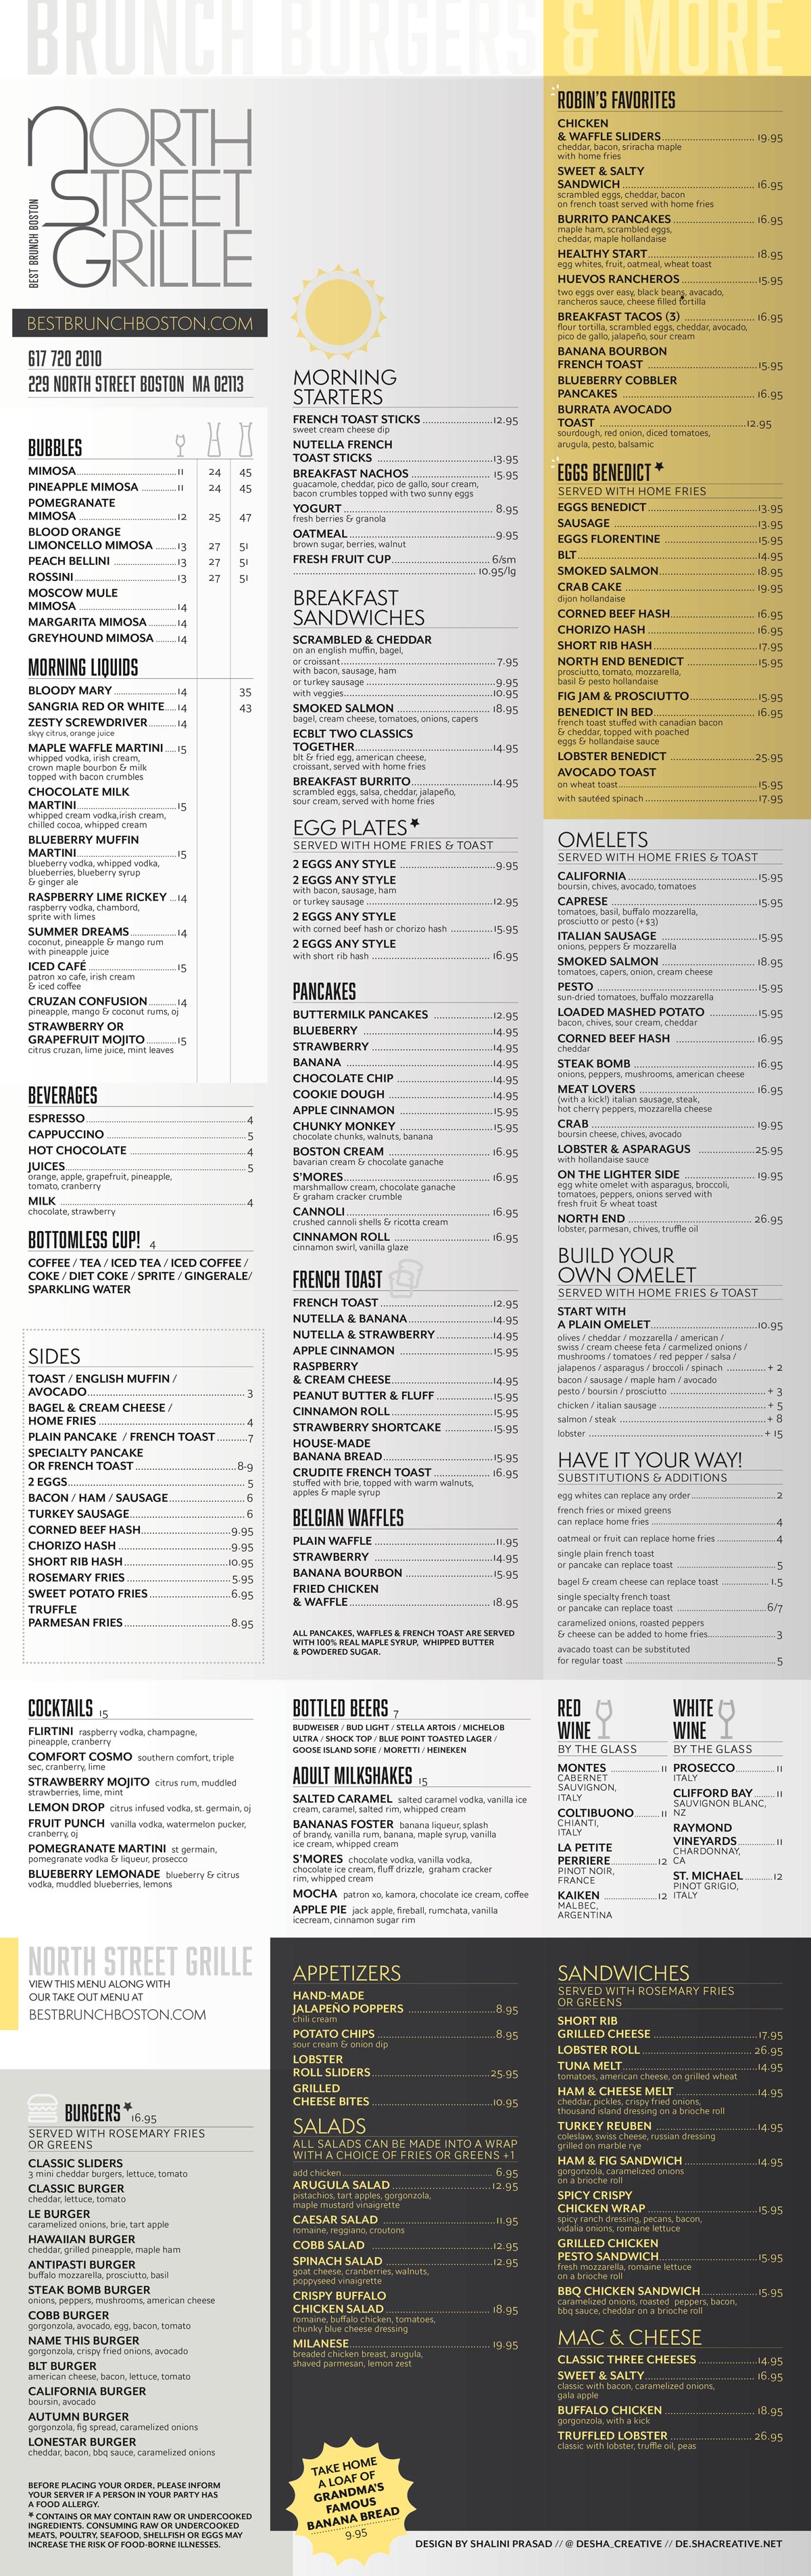 Dine-in Menu - Brunch in Boston - Burgers and More Menu at The North Street Grille in Boston's historic north end. Drinks, Burgers, Pancakes, French Toast 